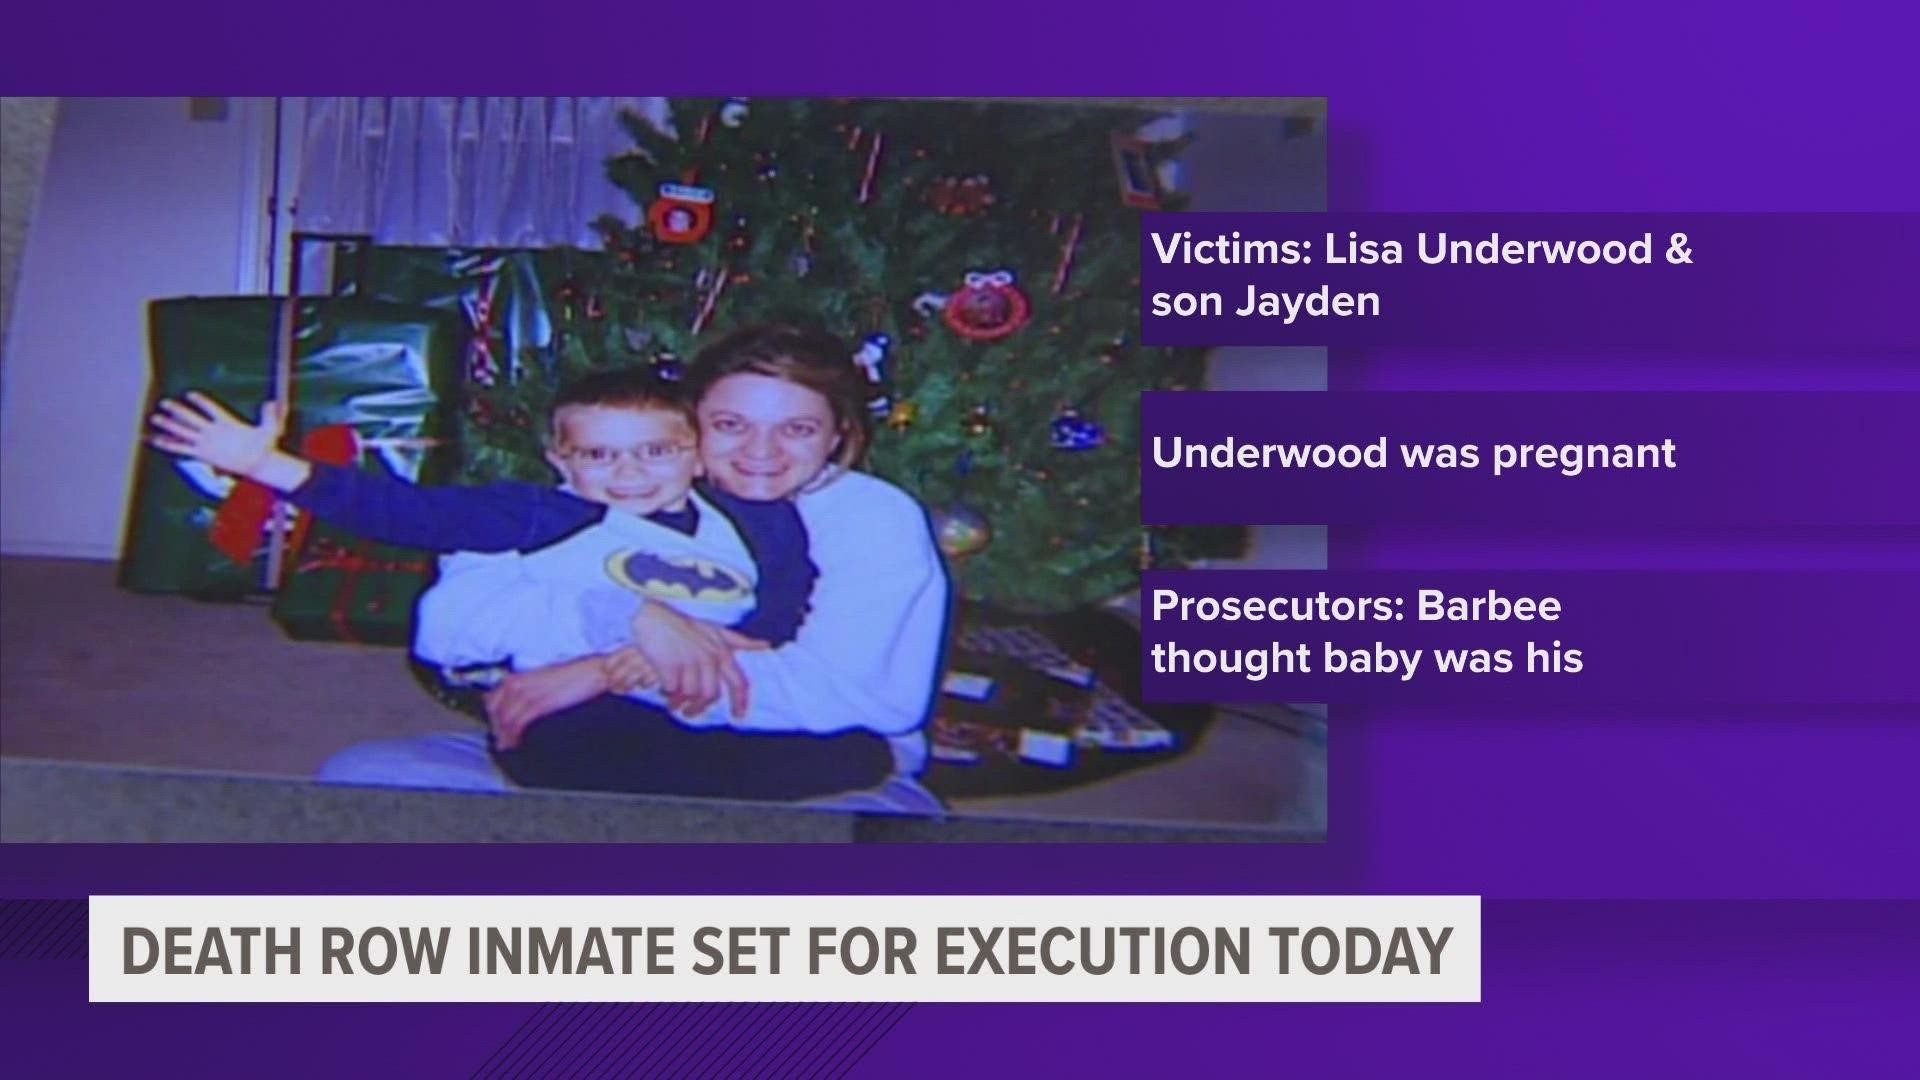 A judge put Barbee's execution on pause, but it's now scheduled for Wednesday night.